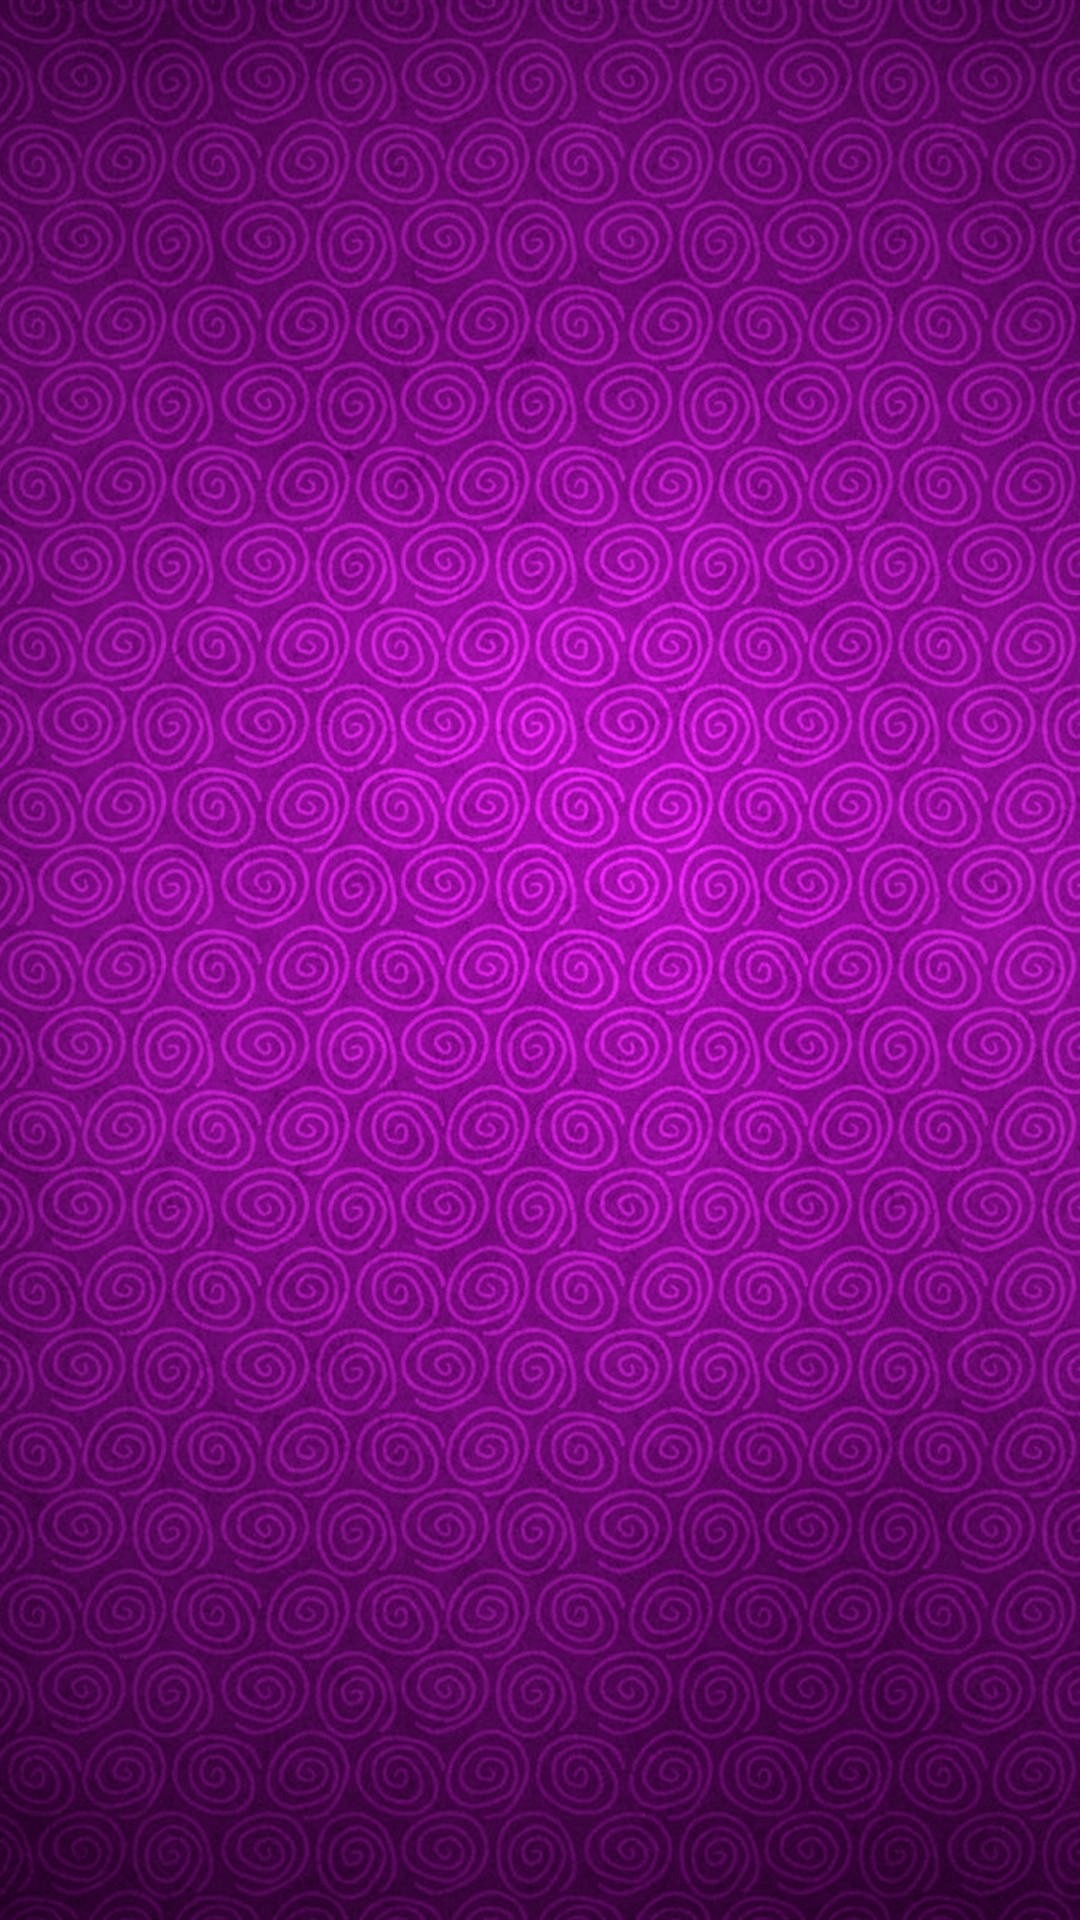 Purple Wallpaper iPhone HD with high-resolution 1080x1920 pixel. You can use this wallpaper for your iPhone 5, 6, 7, 8, X, XS, XR backgrounds, Mobile Screensaver, or iPad Lock Screen